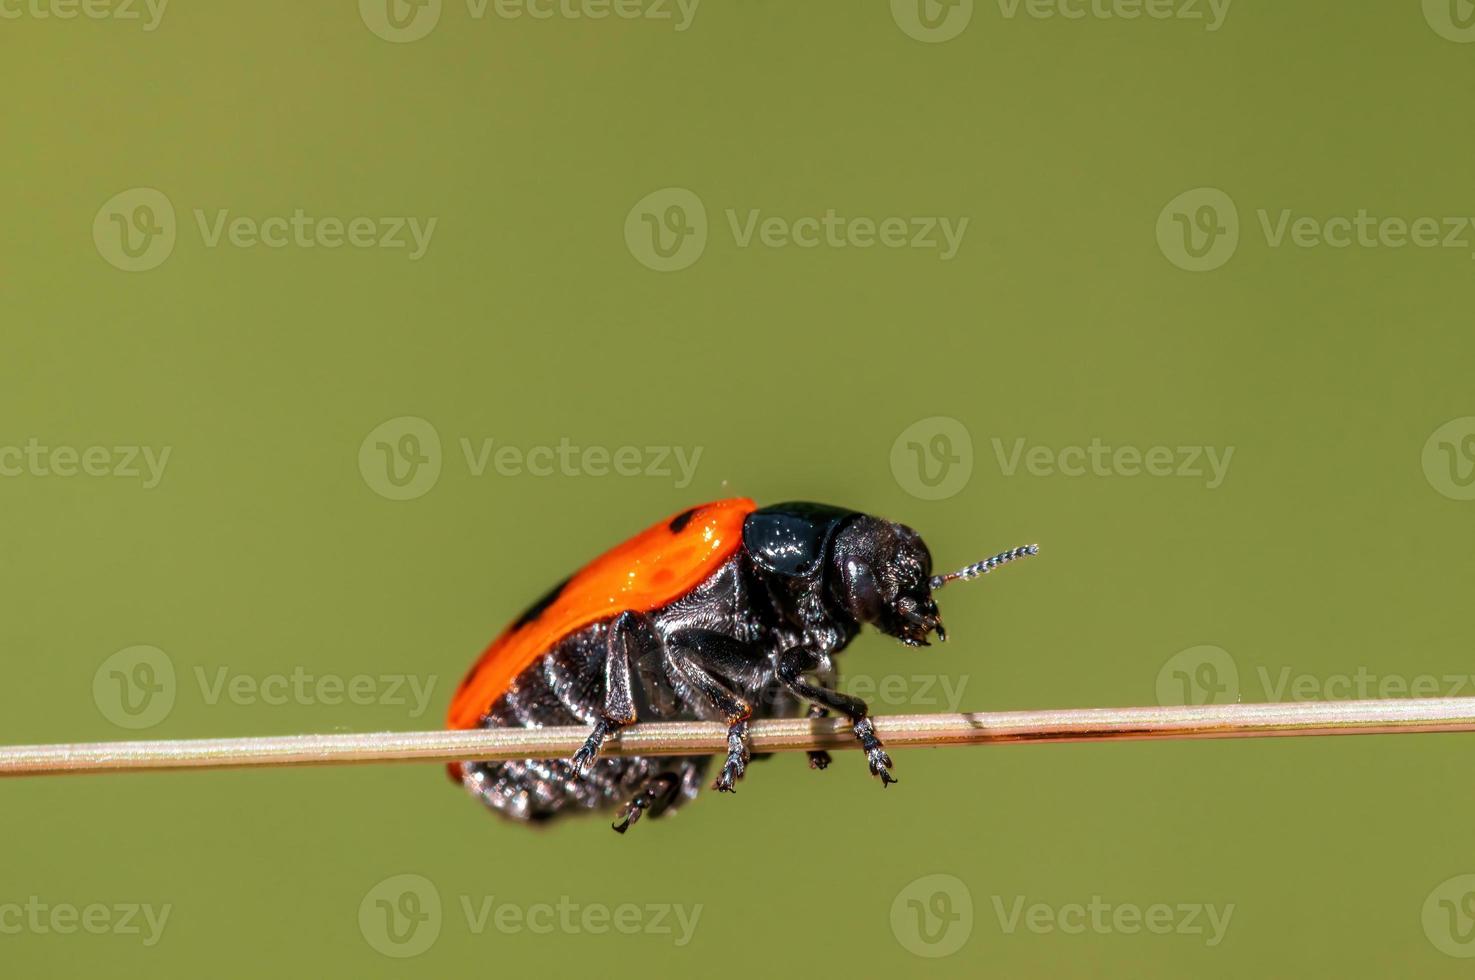 one ant bag beetle sits on a stalk in a meadow photo